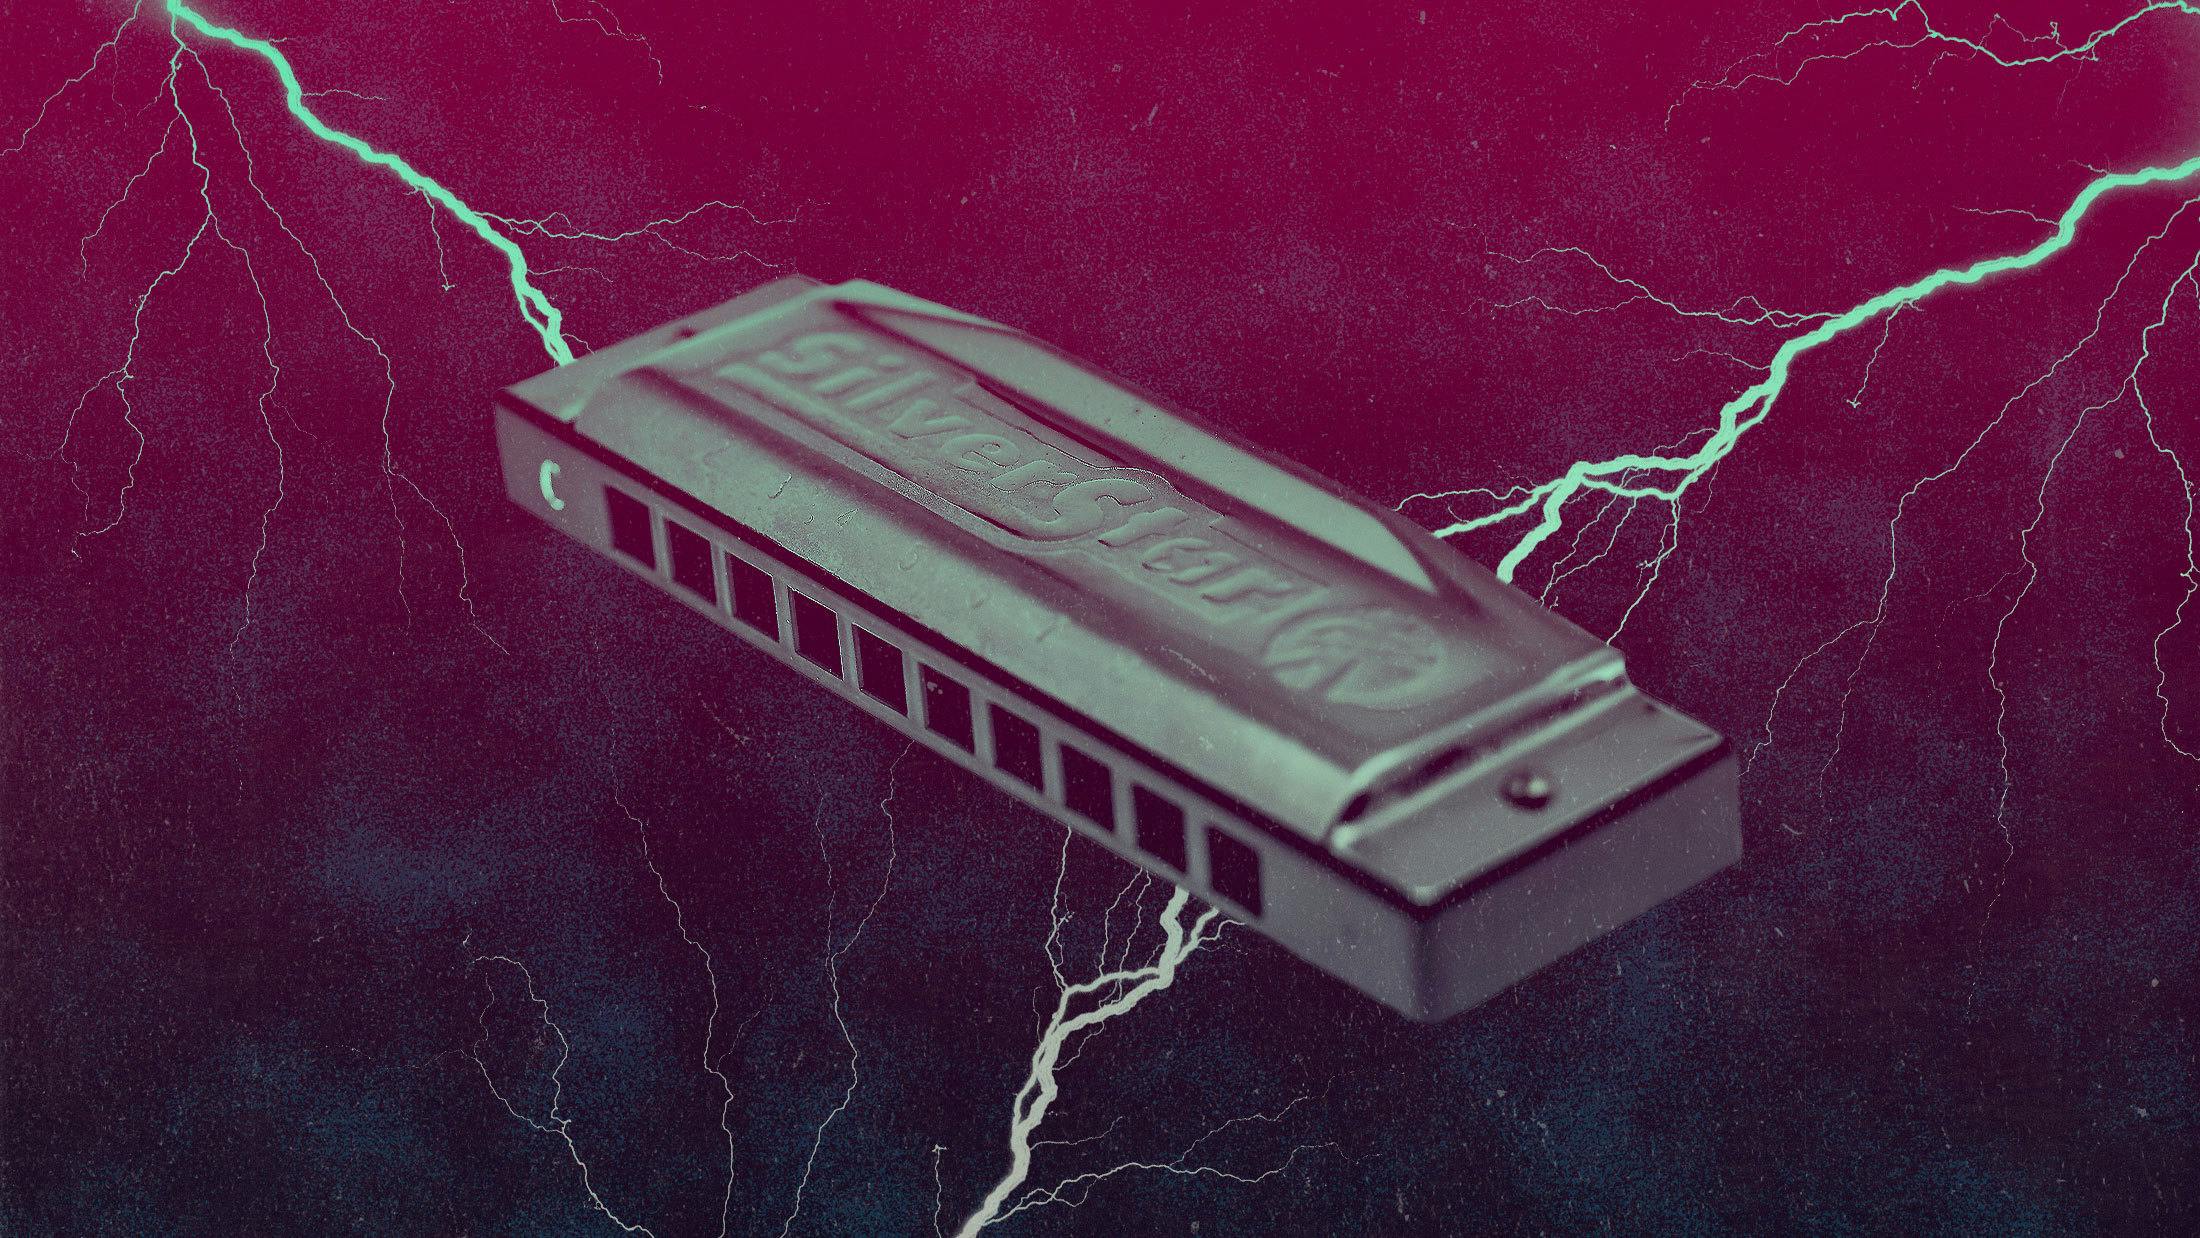 The 13 greatest uses of harmonica in rock and metal